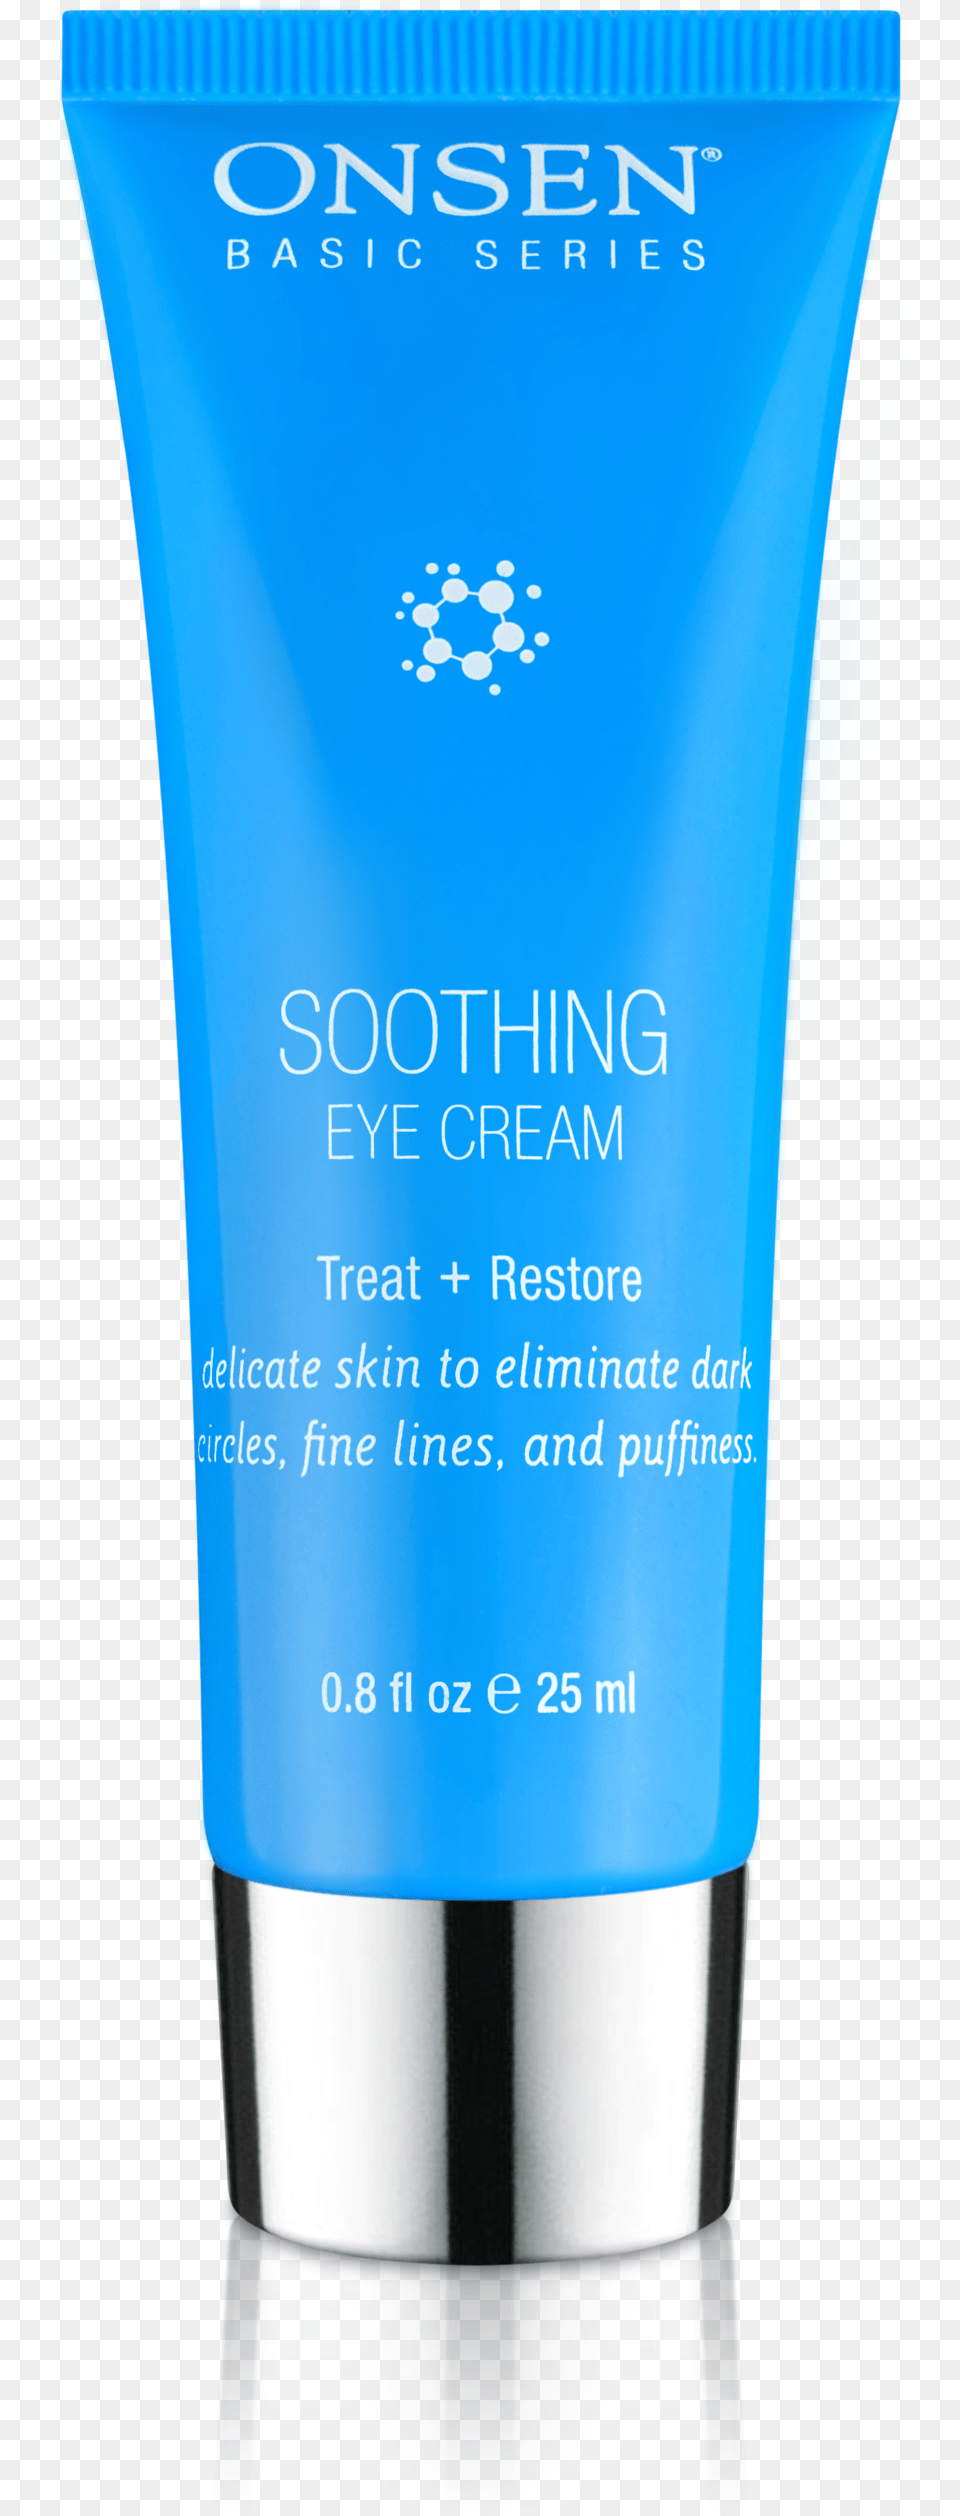 Soothing Eye Cream Clarins Mascarilla De Ojos, Bottle, Cosmetics, Sunscreen, Lotion Free Transparent Png